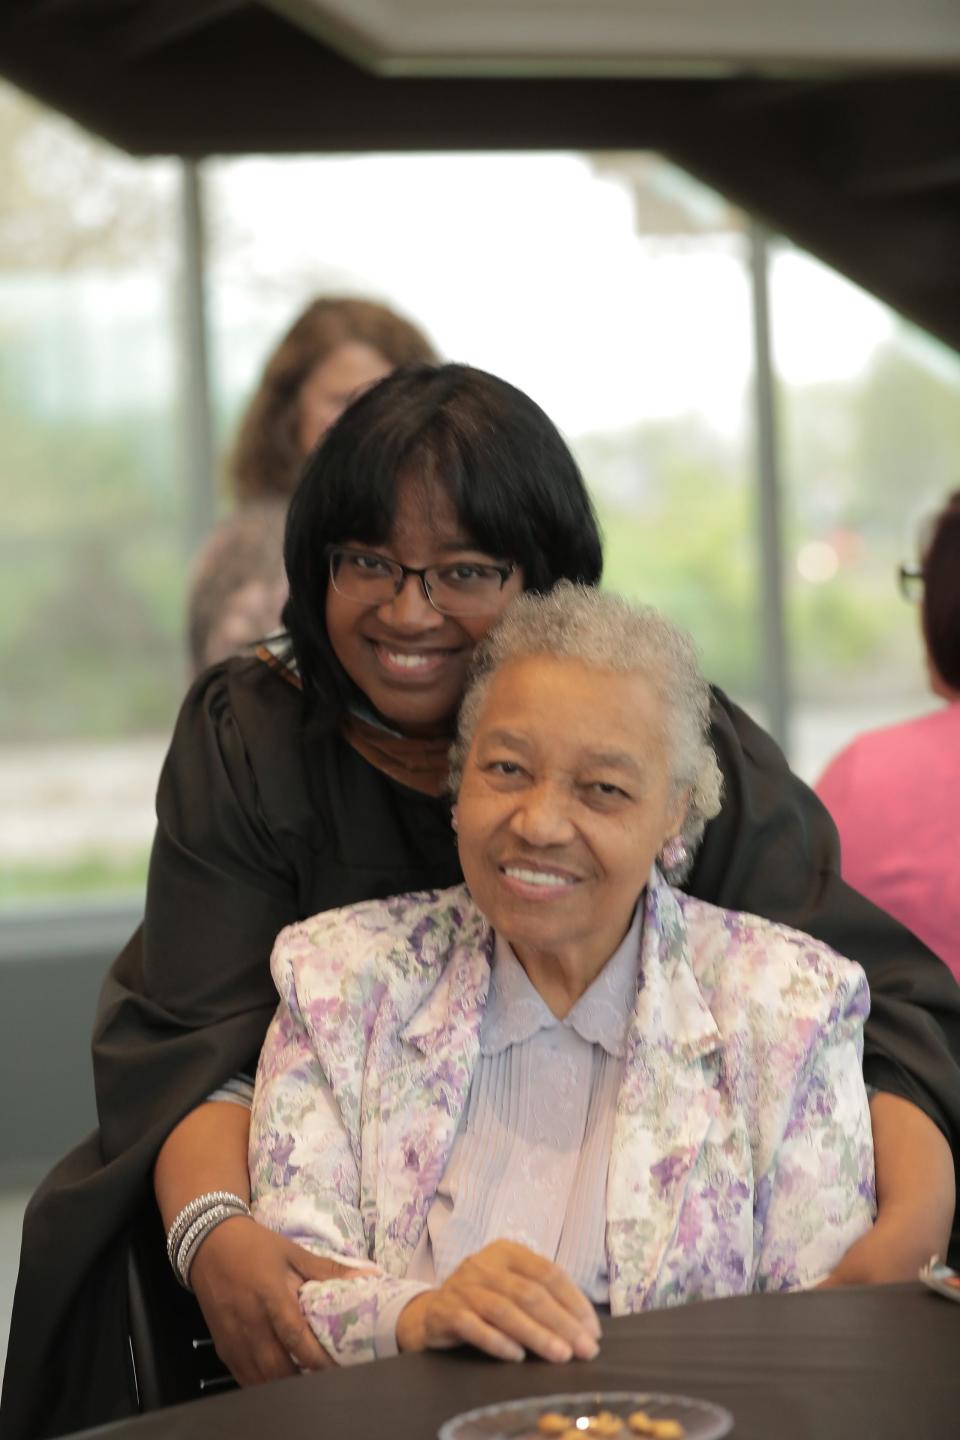 Matilda Barber with her daughter, Fay Dansby-Barber, in 2019. Barber said cancer runs in her family, which is why she got pap smears annually and has advised her daughters to do the same.